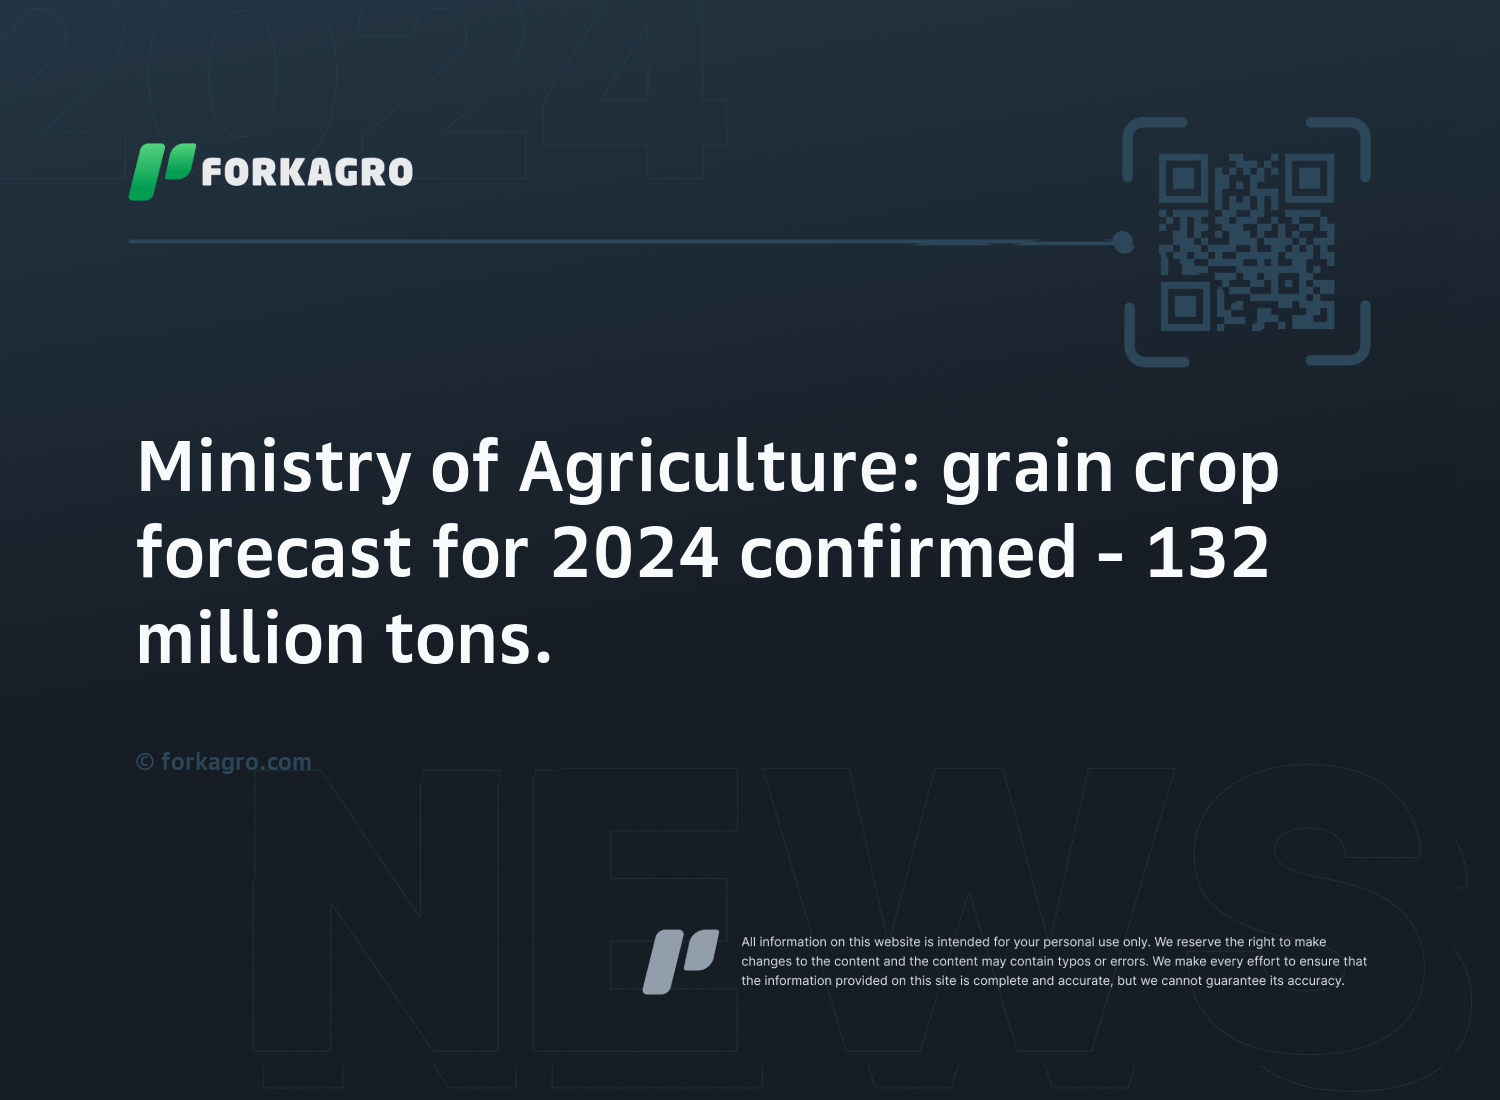 Ministry of Agriculture: grain crop forecast for 2024 confirmed - 132 million tons.